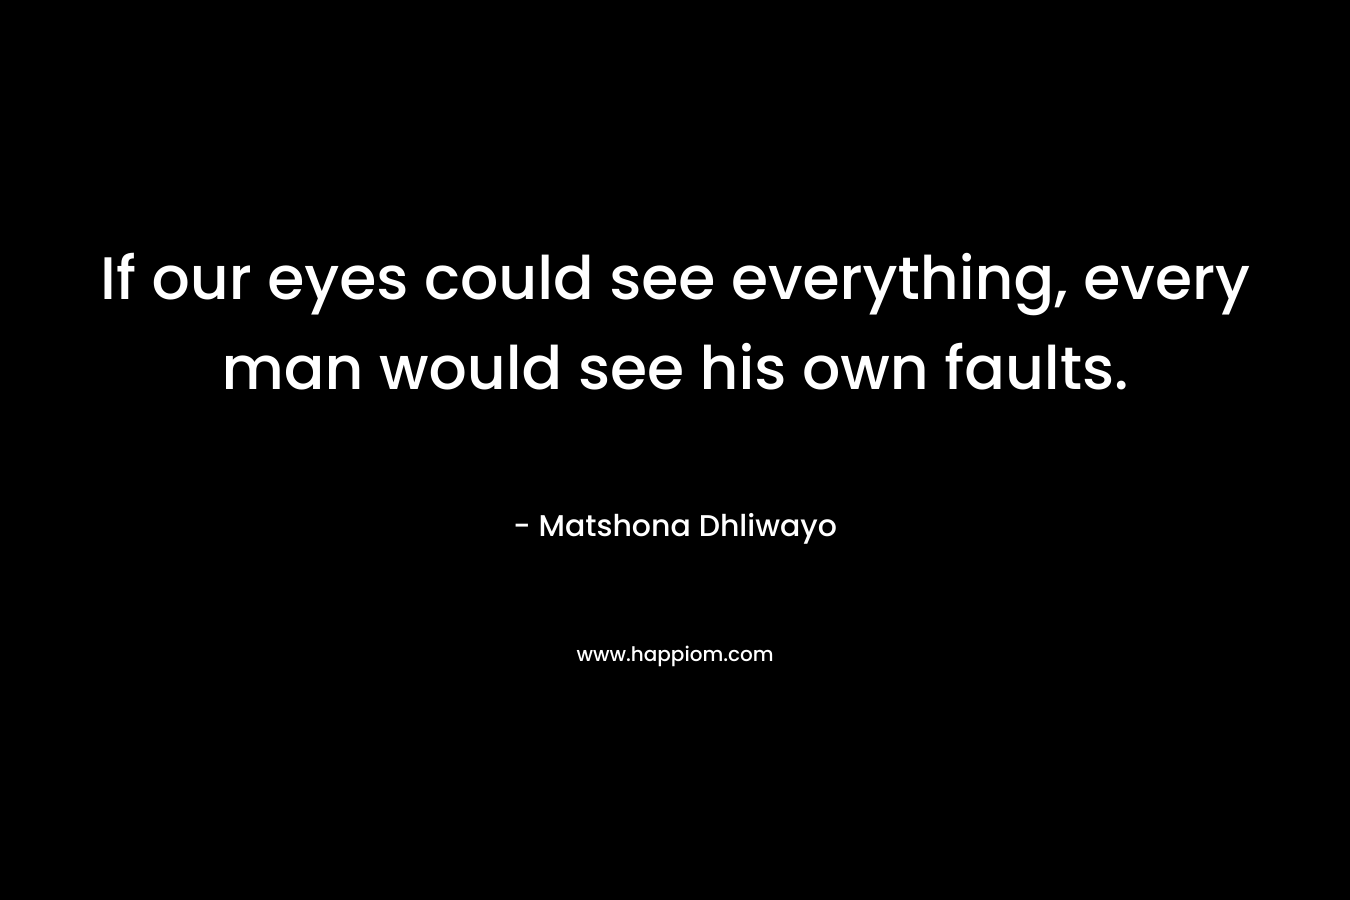 If our eyes could see everything, every man would see his own faults.